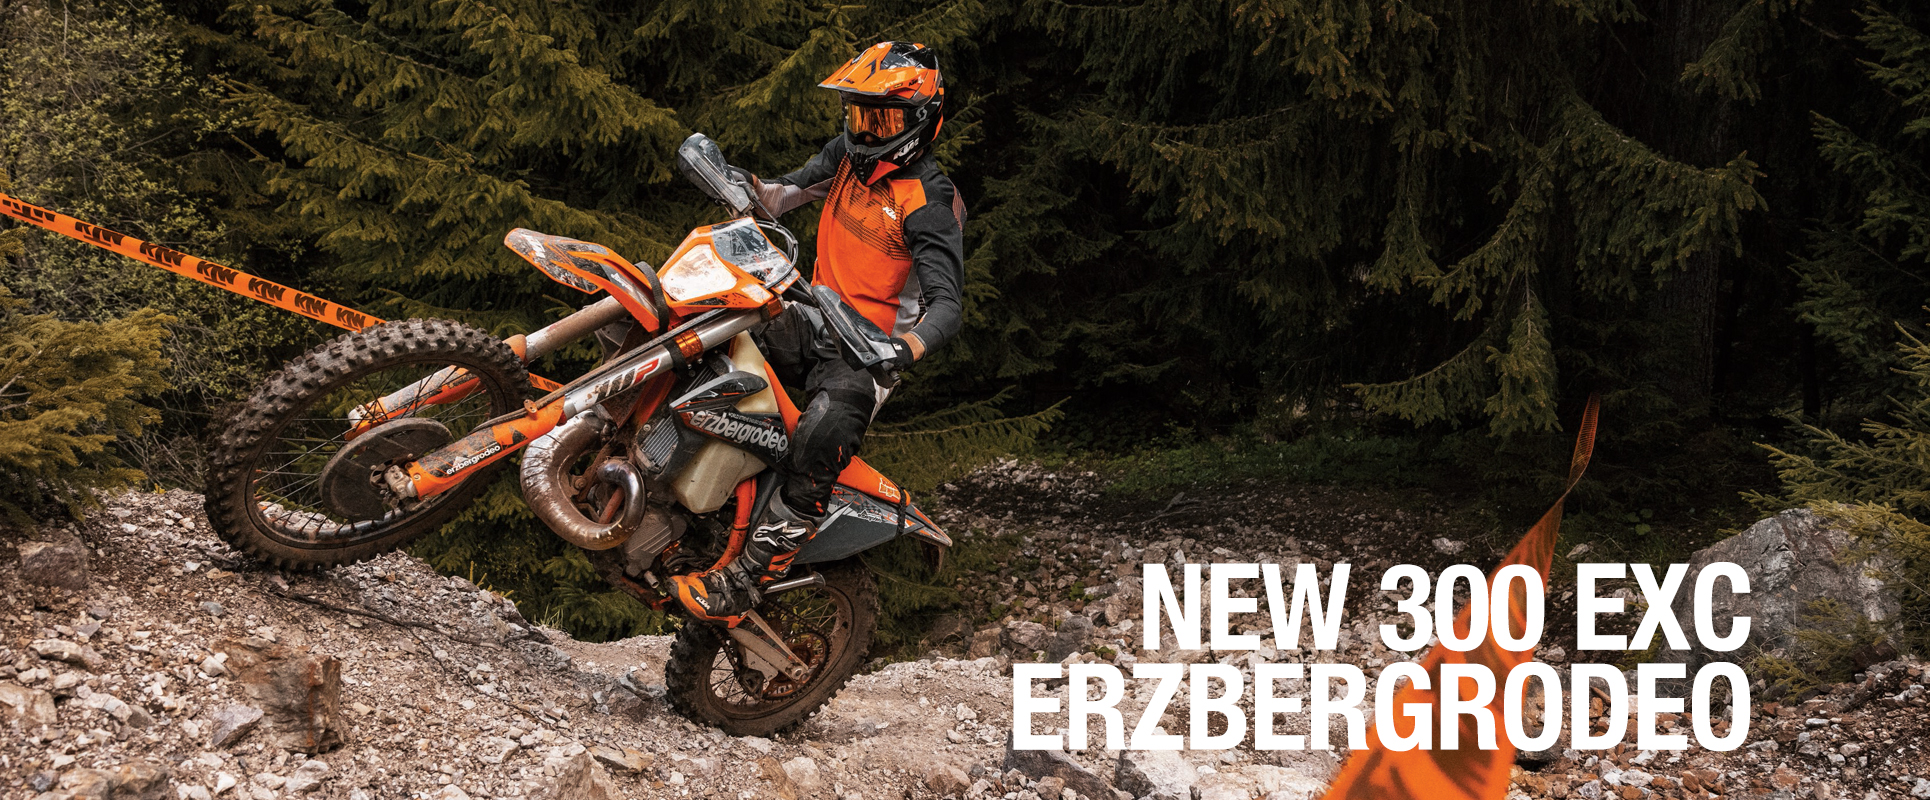 16/06/2022 - THE NEW KTM 300 EXC ERZBERGEDITION